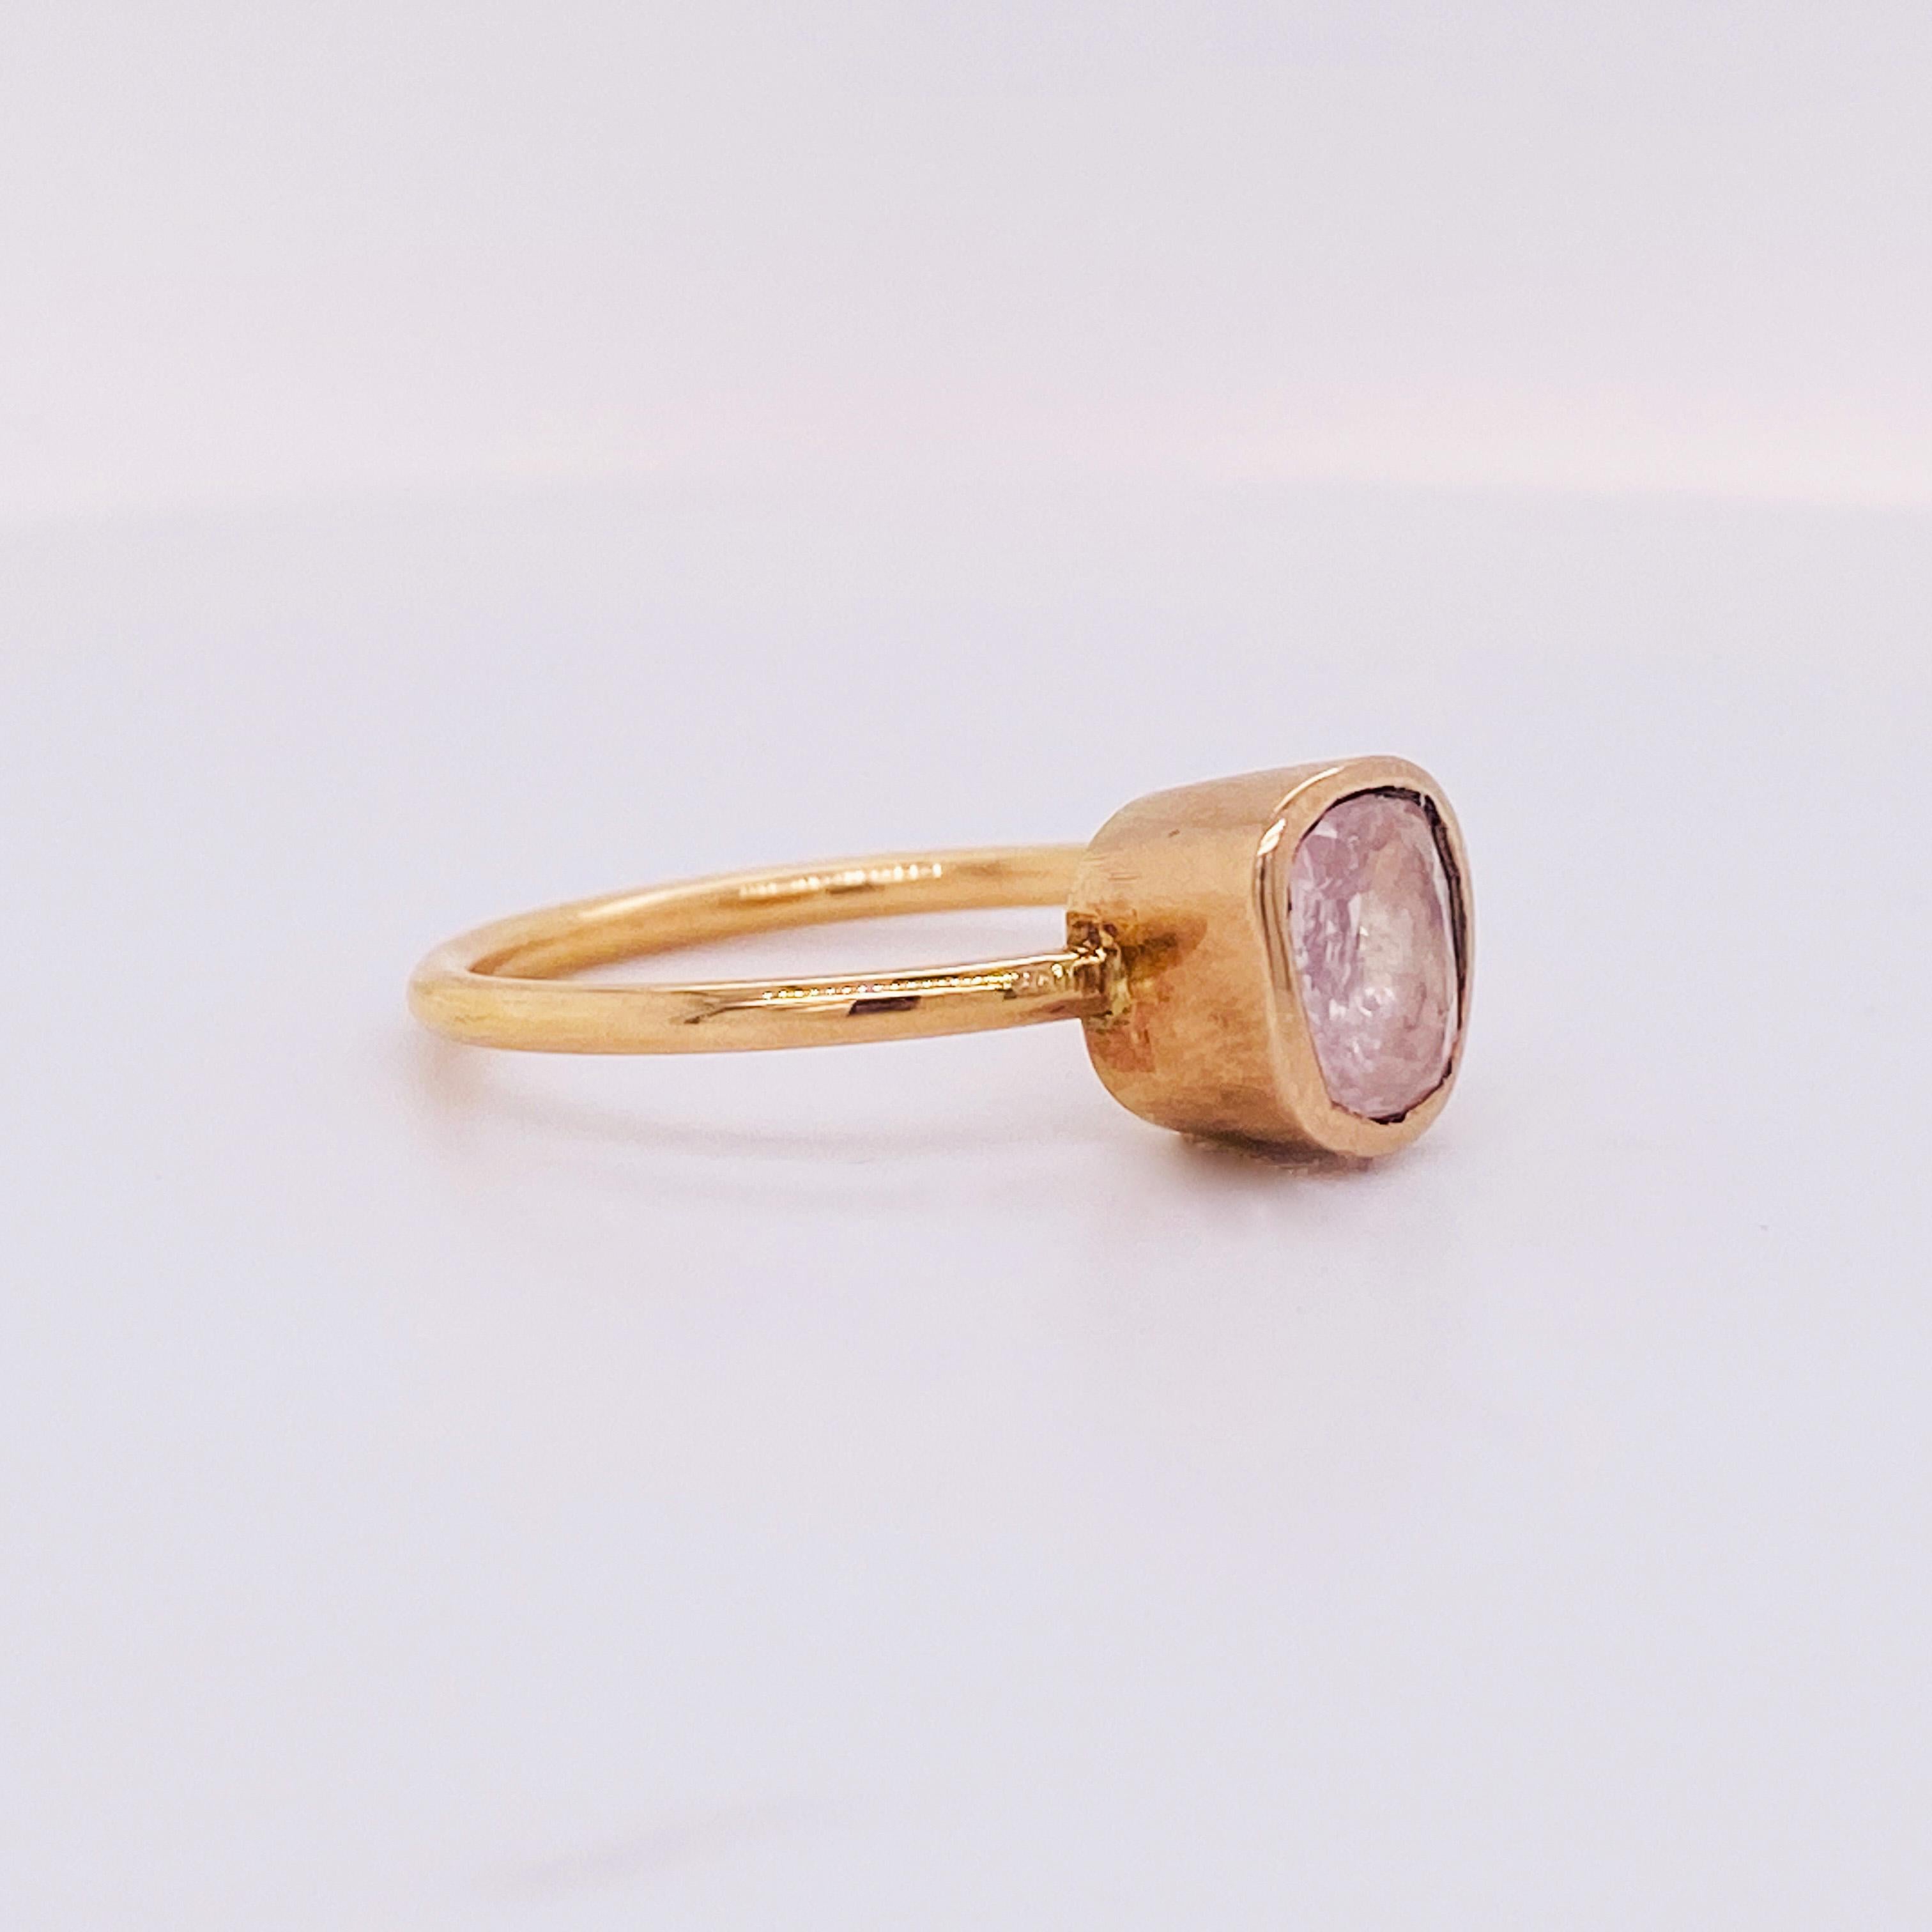 Contemporary Unique Rustic Pink Sapphire Bezel Solitaire Ring 1.53 Carats in 18k Rose Gold Lv For Sale